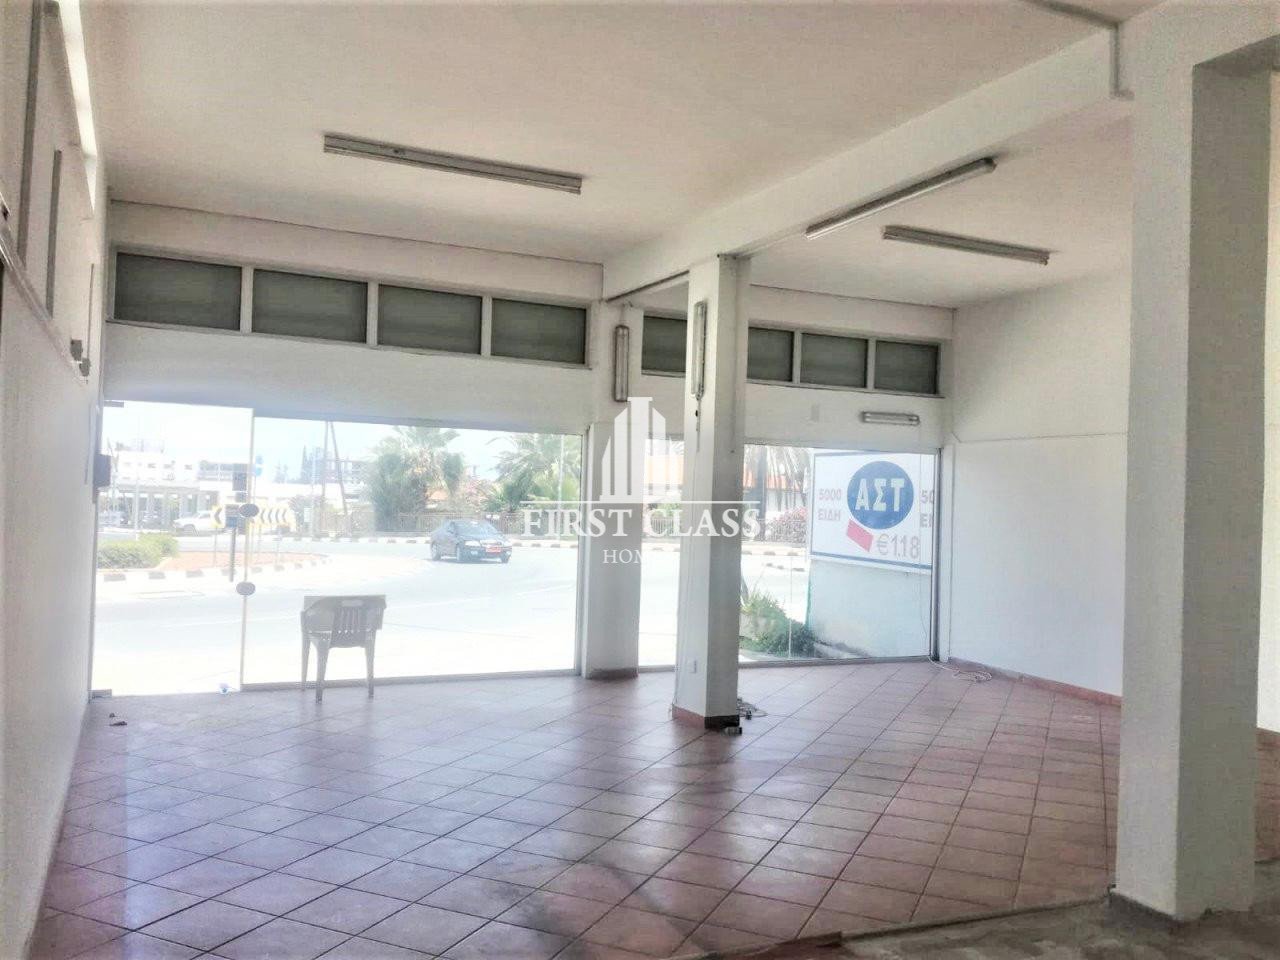 Property for Rent: Commercial (Shop) in Aglantzia, Nicosia for Rent | Key Realtor Cyprus